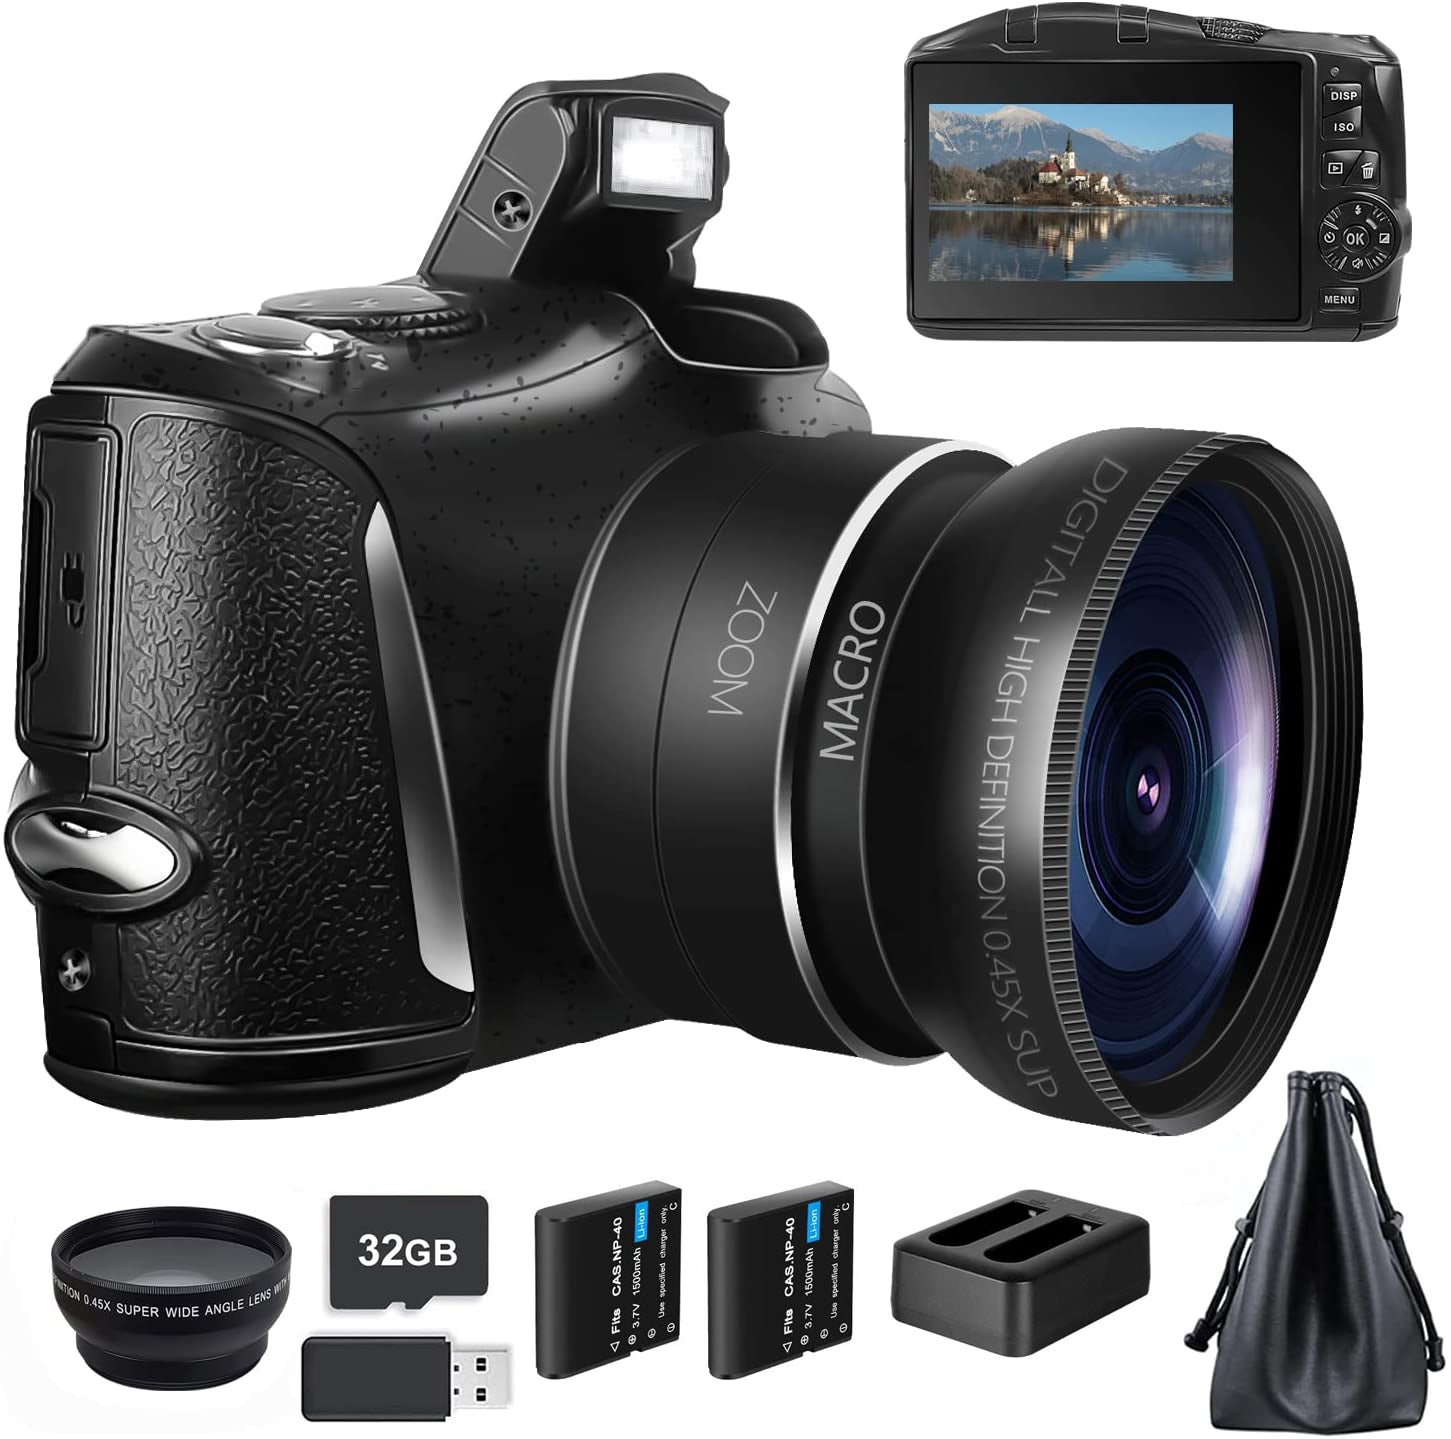 NBD Digital Camera 4K 48MP Vlogging Camera, Perfect Camera for Photography with 32GB SD Card, 52mm Wide Angle & Macro Lens，16x Digital Zoom, An Ideal Compact Camera for Beginners